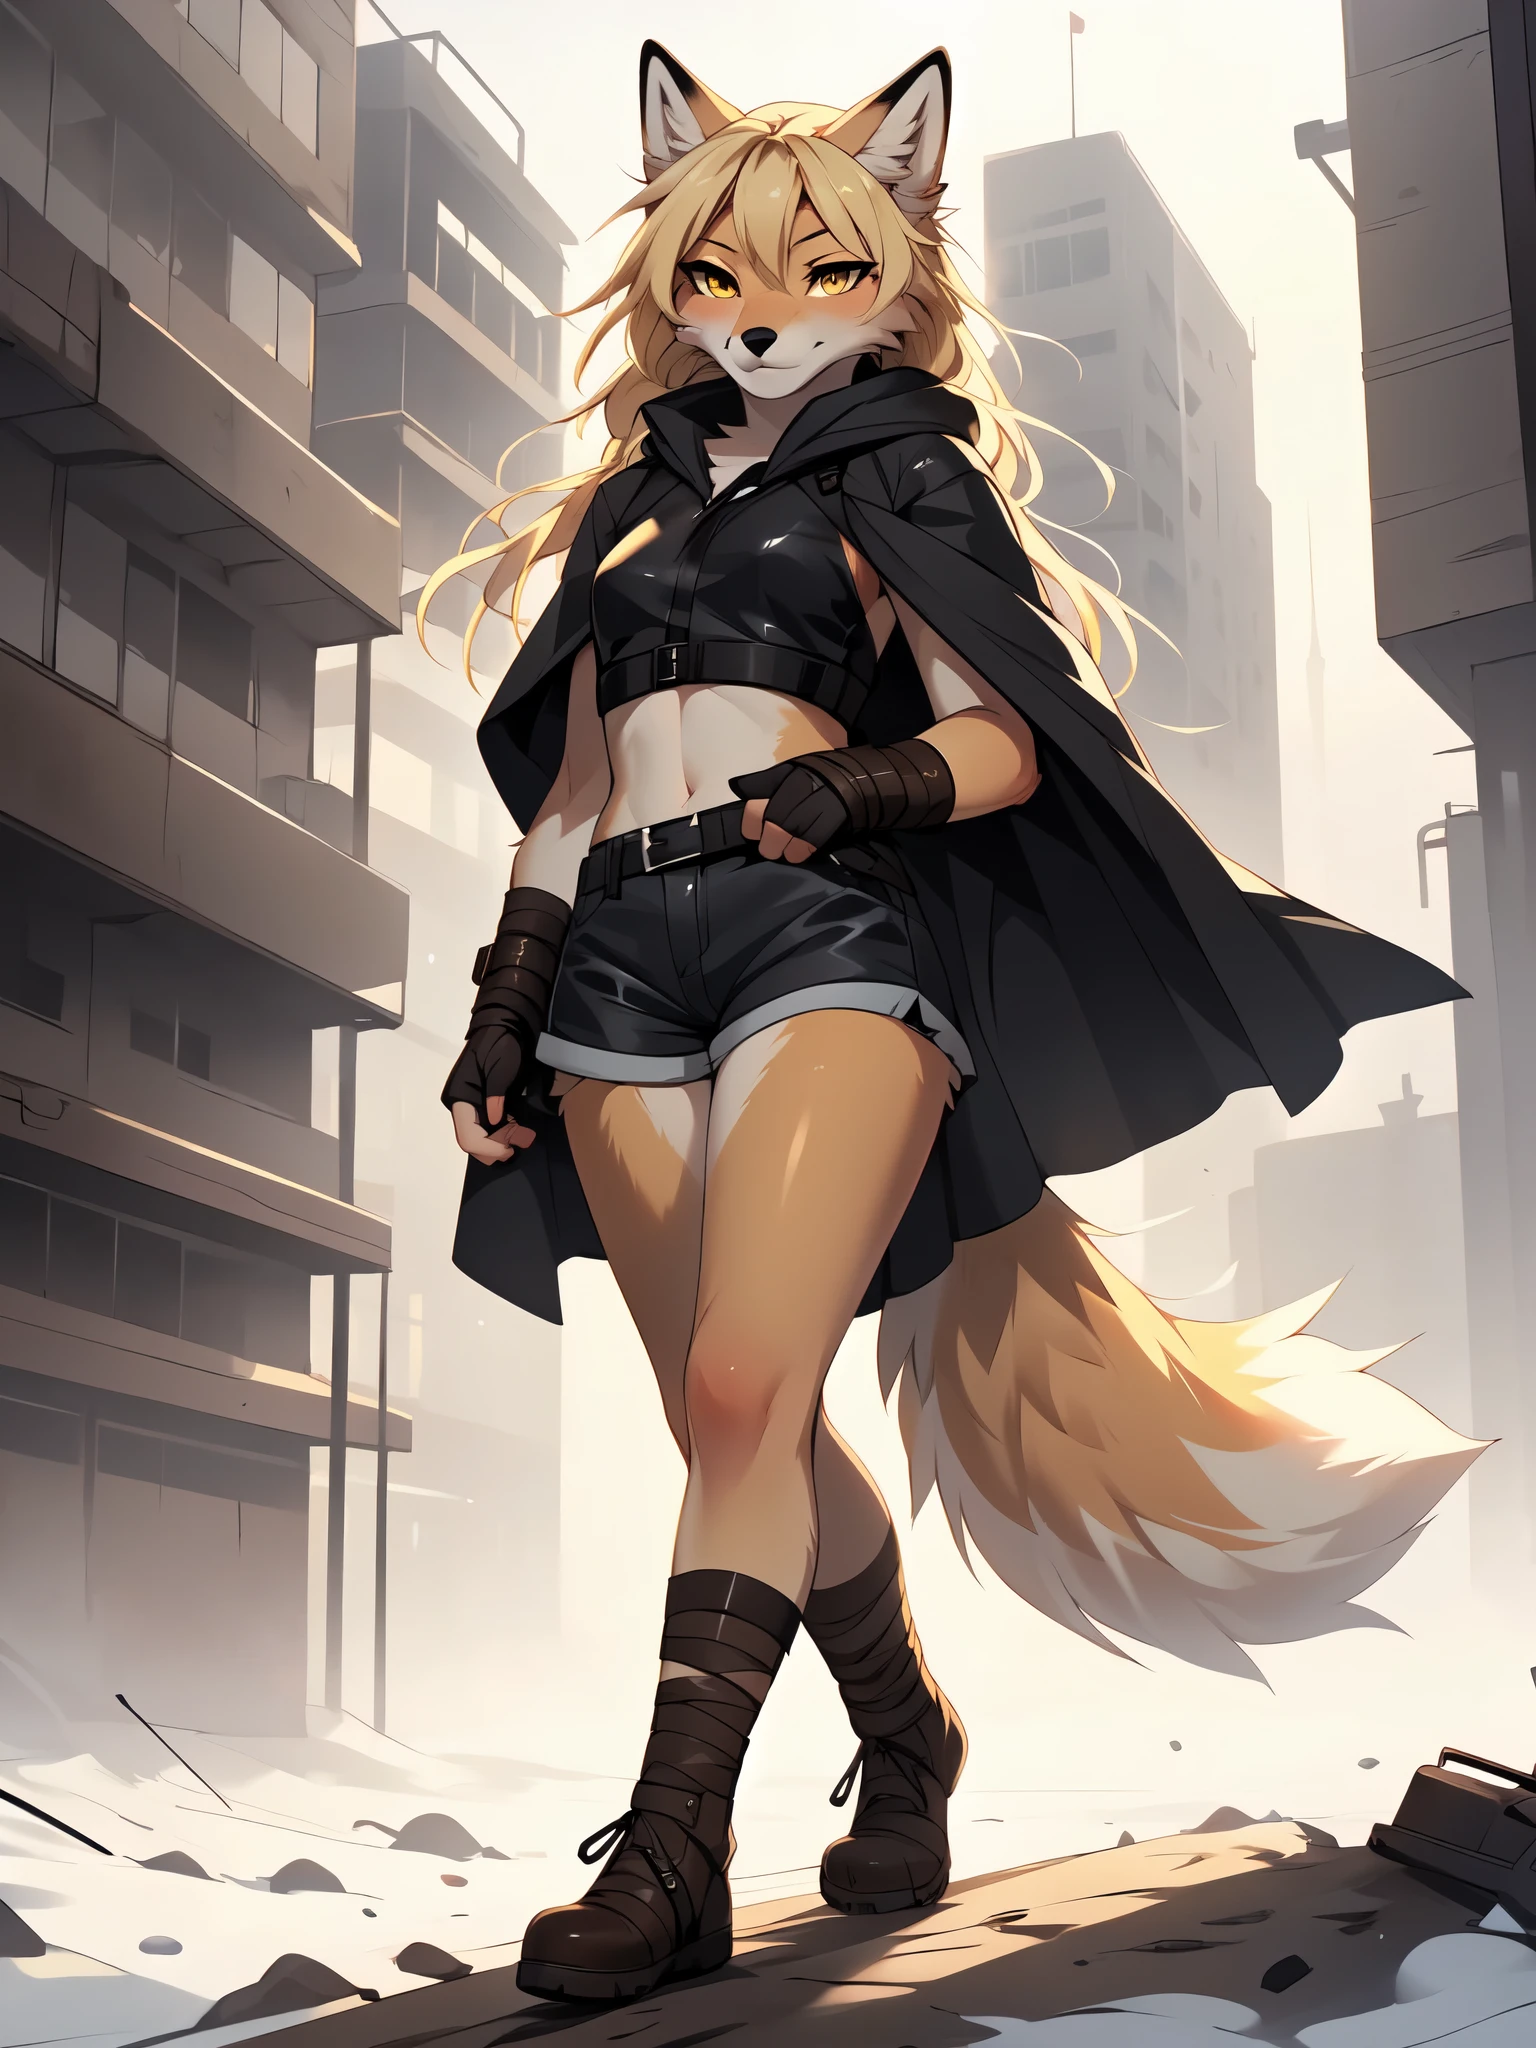 By fumiko, by hyattlen, by hioshiru, solo, tan fox girl, blonde hair, yellow eyes, cute snout, black nose, blonde fox tail, wearing brown cloak, leather armor top, leather short shorts, foot wraps, leather gauntlets, exposed fingers, feet wrapped in bandages, exposed toes, holding a sniper rifle with both hands   BREAK     in a post apocalyptic world, walking, looking concerned, wide open scene, foggy, 